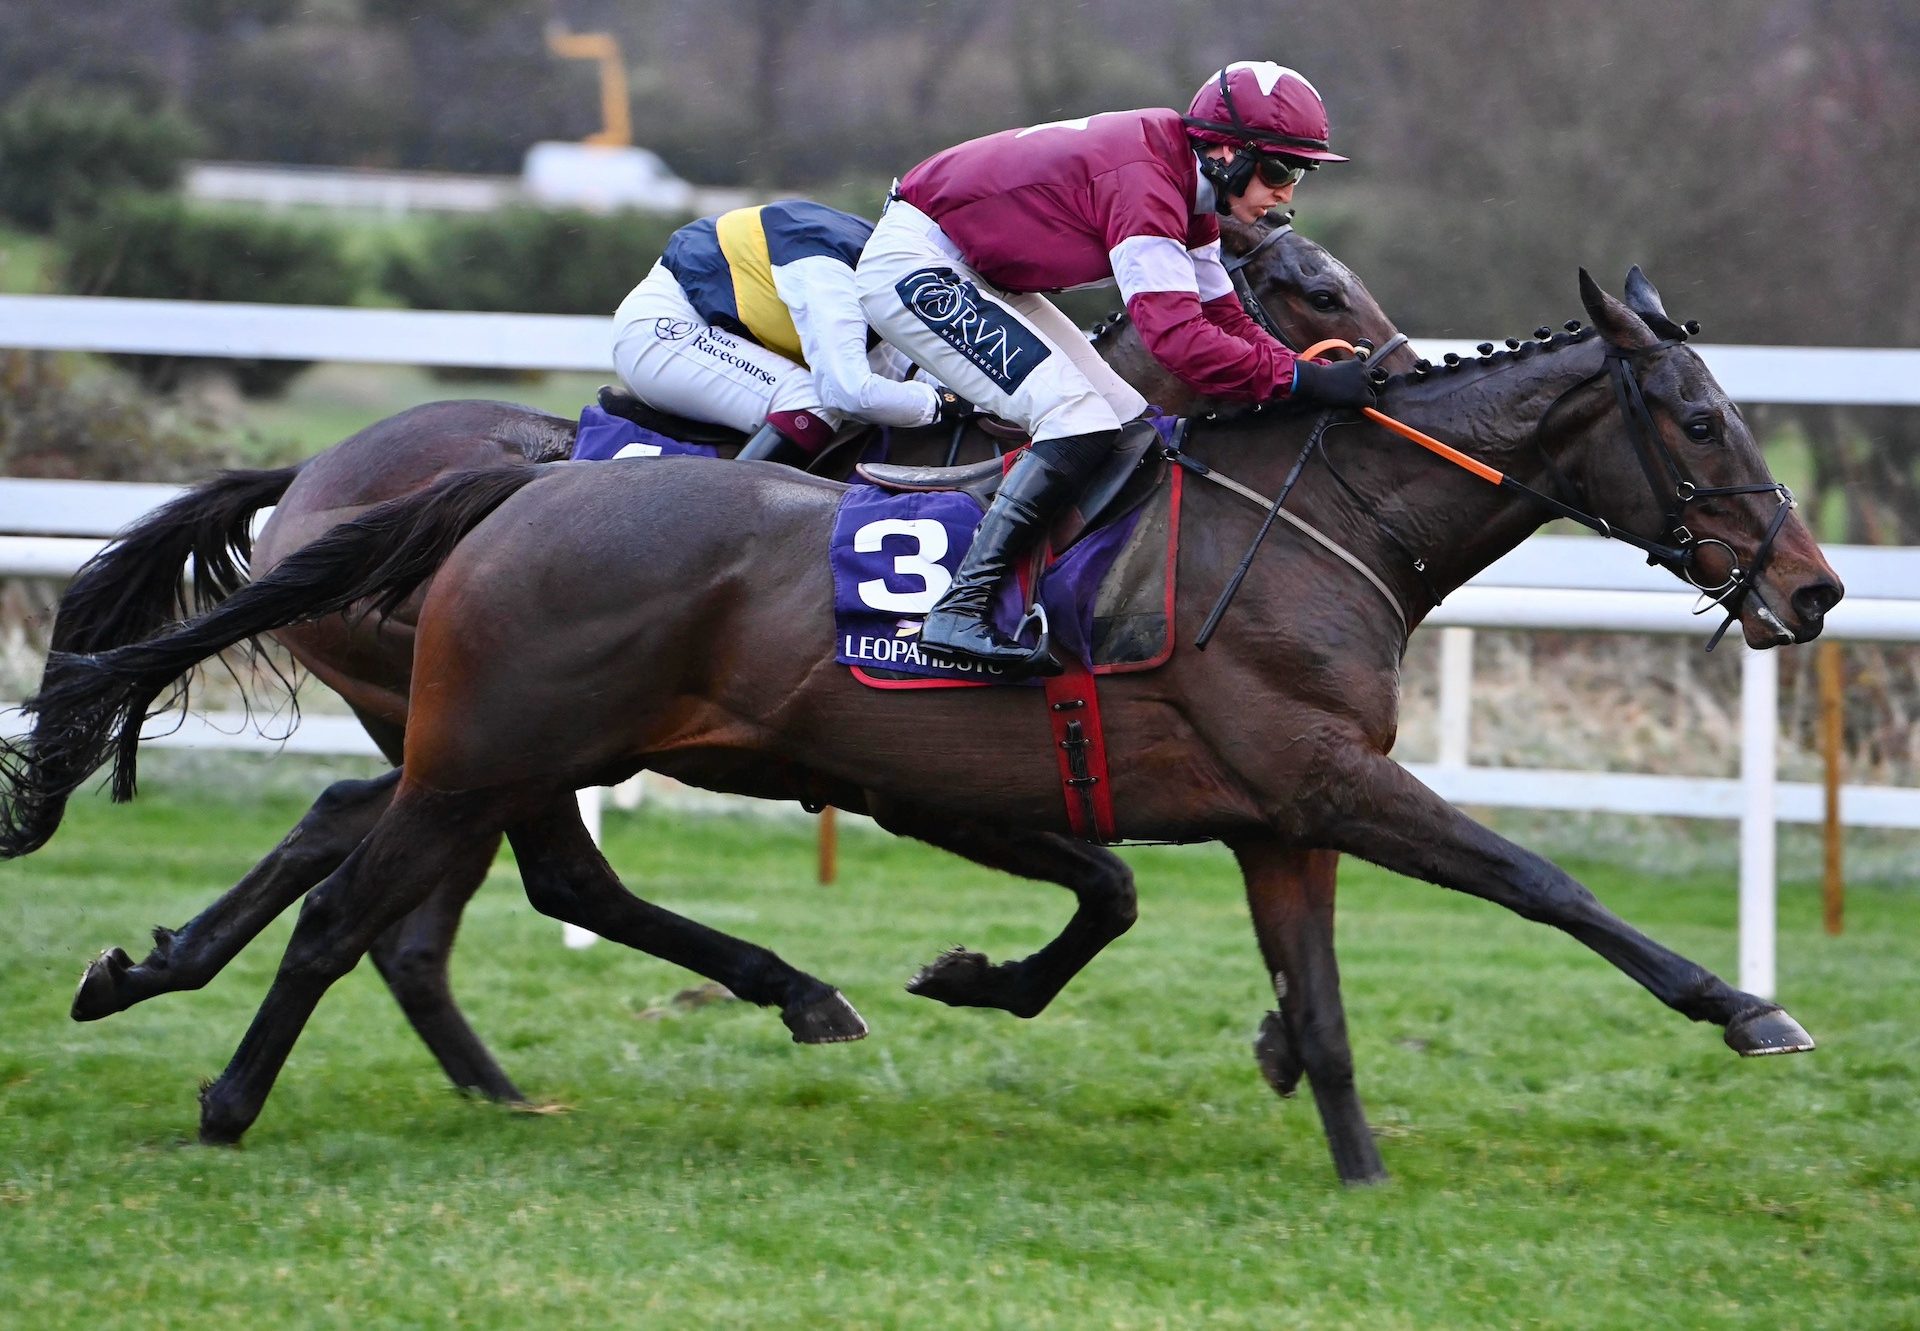 Patter Merchant (Walk In The Park) Wins The Bumper At Leopardstown